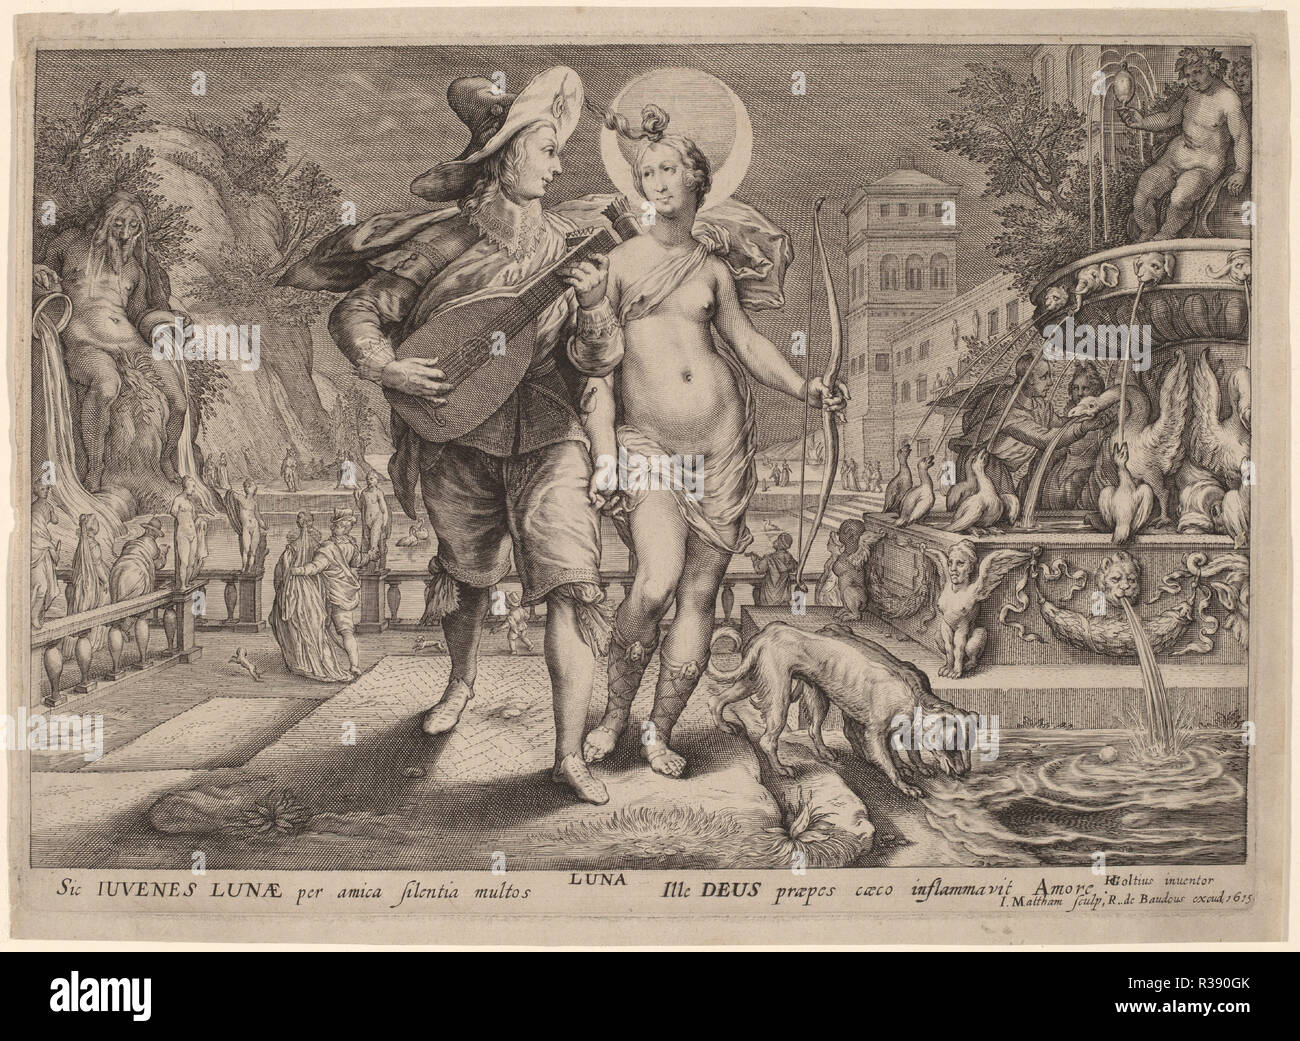 Diana as Luna Accompanying a Young Man Serenading. Dated: 1615. Dimensions: plate: 21.2 x 29.9 cm (8 3/8 x 11 3/4 in.)  sheet: 22.6 x 30.8 cm (8 7/8 x 12 1/8 in.). Medium: engraving on laid paper. Museum: National Gallery of Art, Washington DC. Author: Jacob Matham, after Hendrik Goltzius. Stock Photo